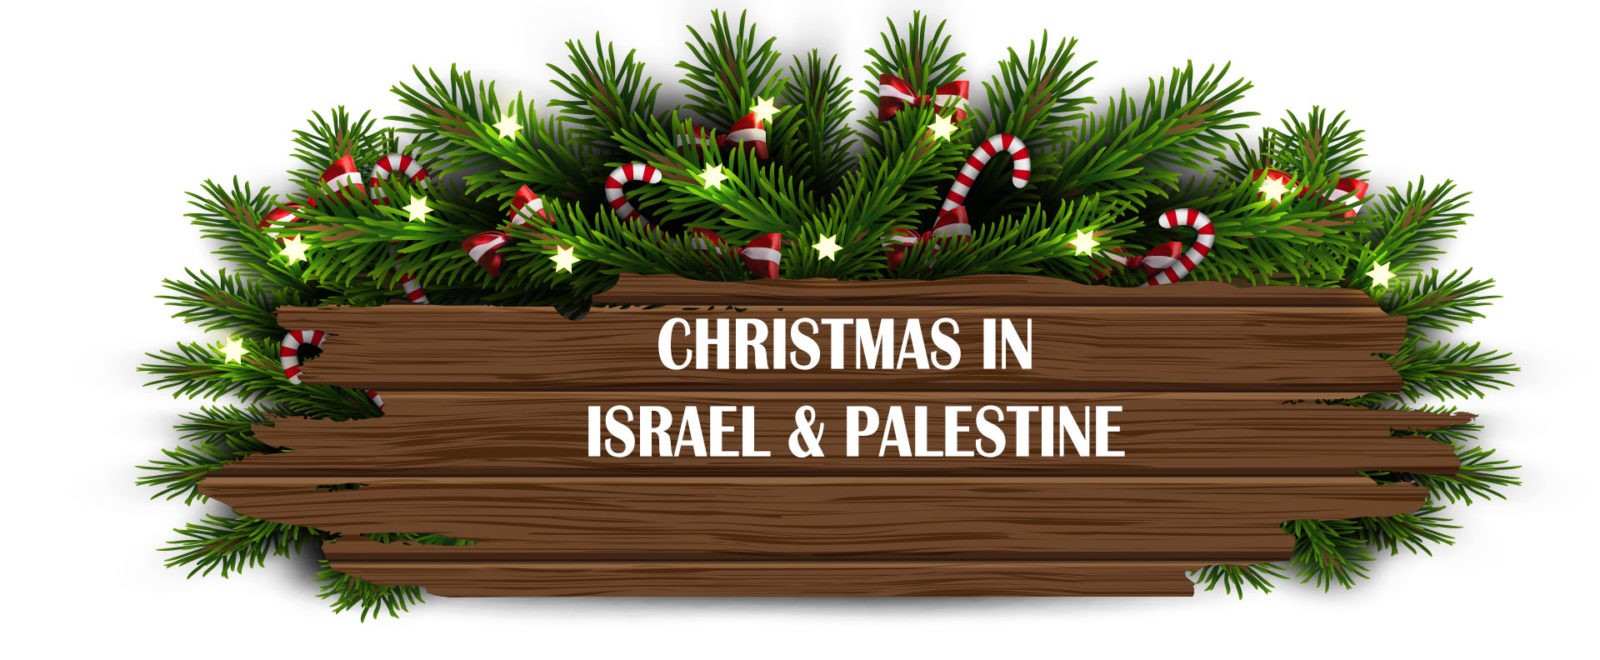 Christmas in Israel and Palestine